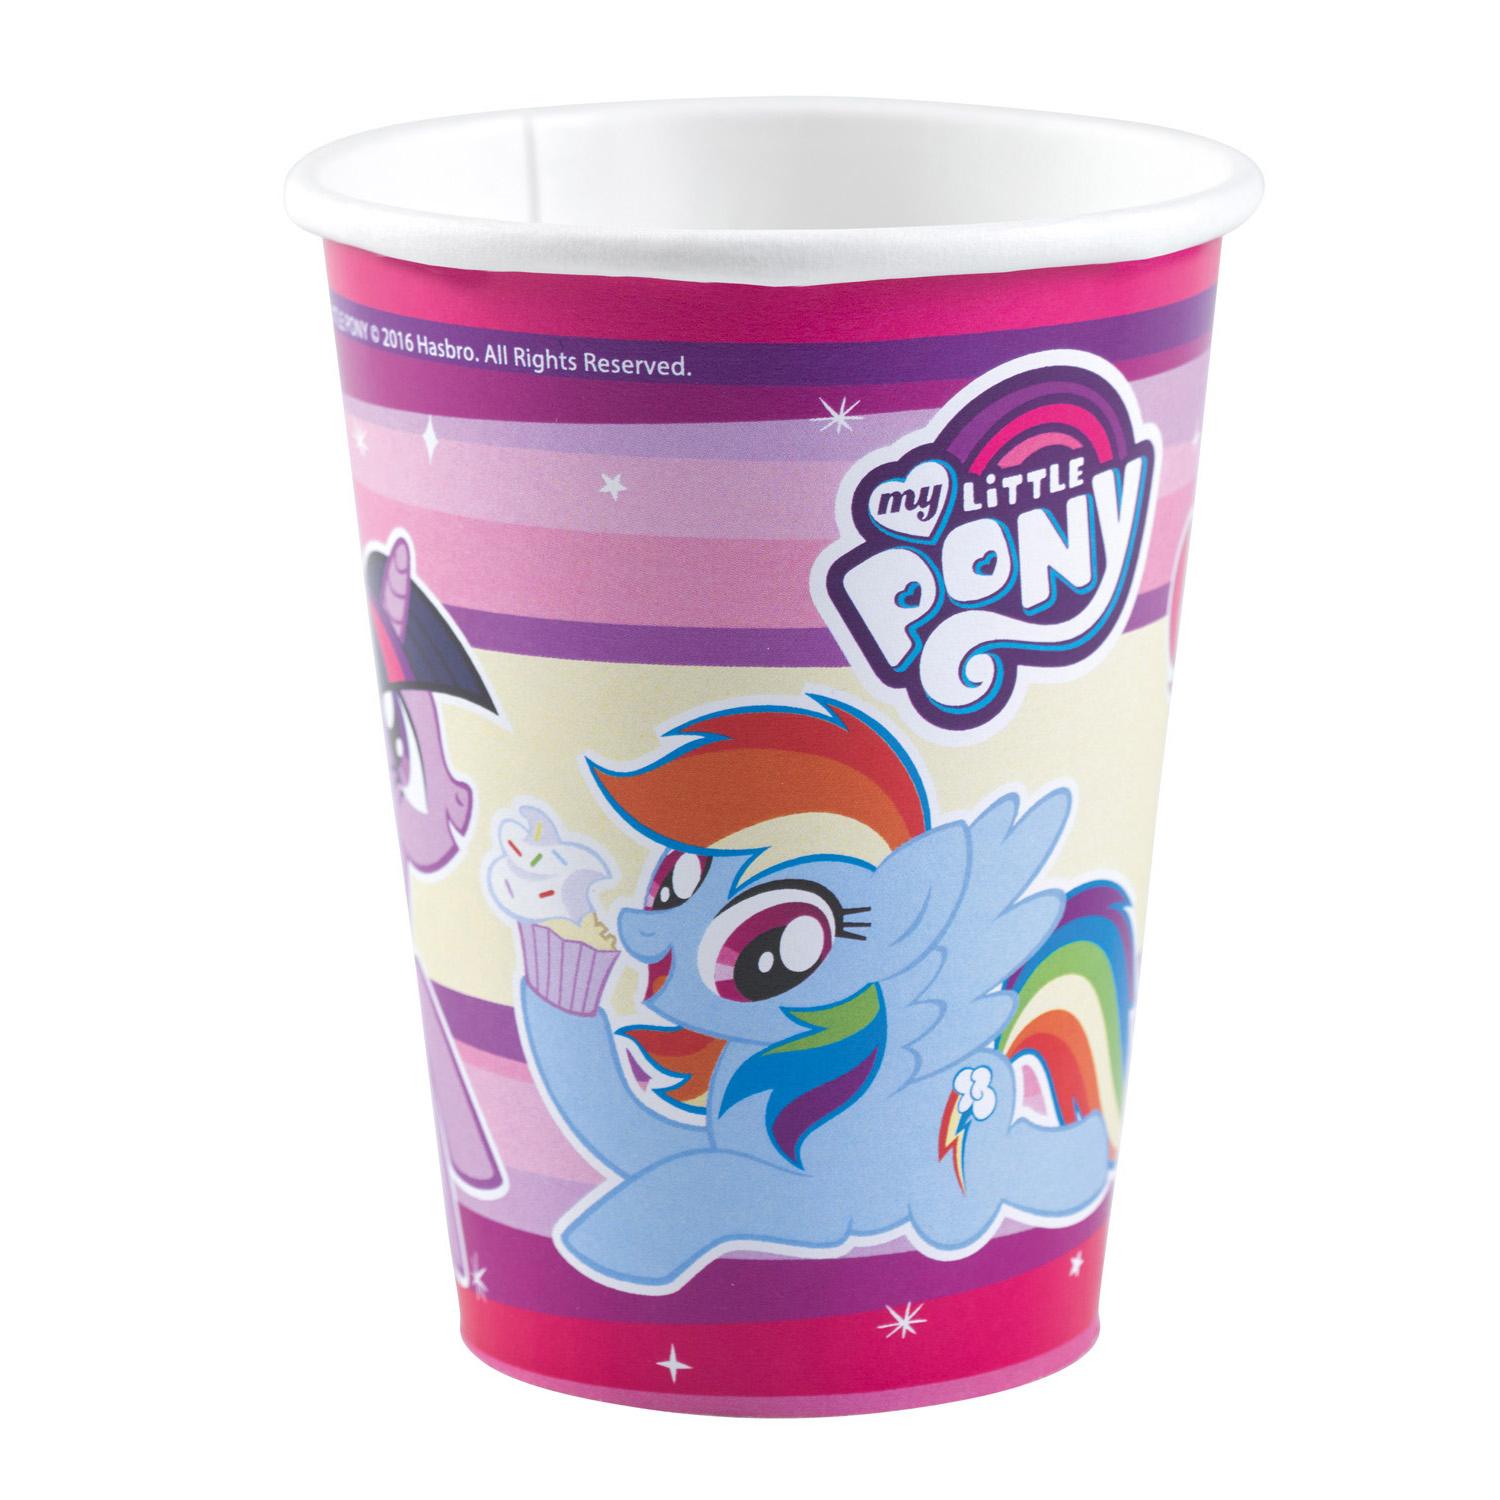 My Little Pony 2017 Paper Cups 9oz, 8pcs Printed Tableware - Party Centre